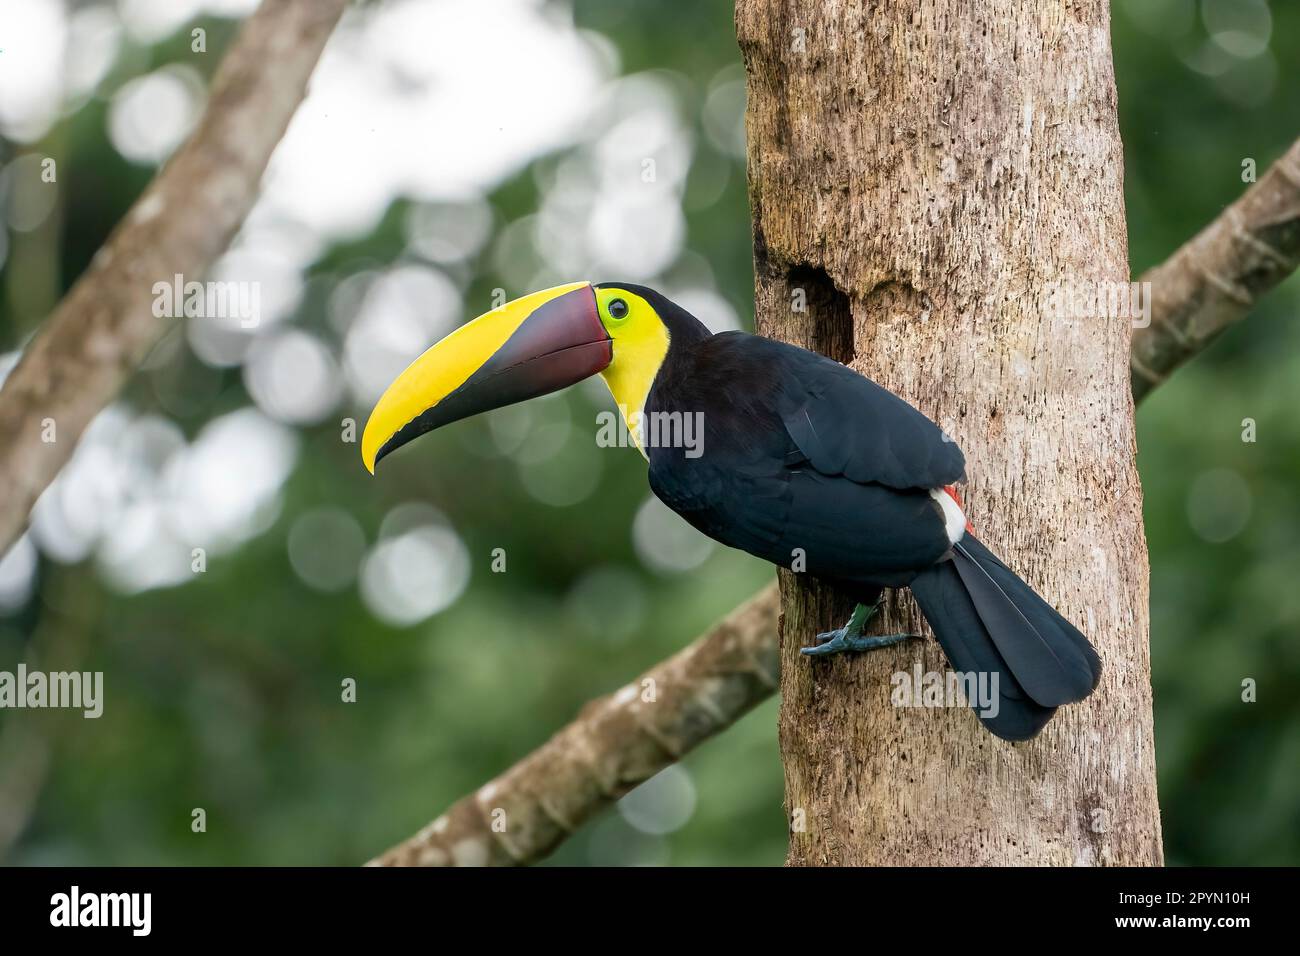 chestnut-mandibled toucan or Swainson's toucan (Ramphastos ambiguus swainsonii) back view Stock Photo